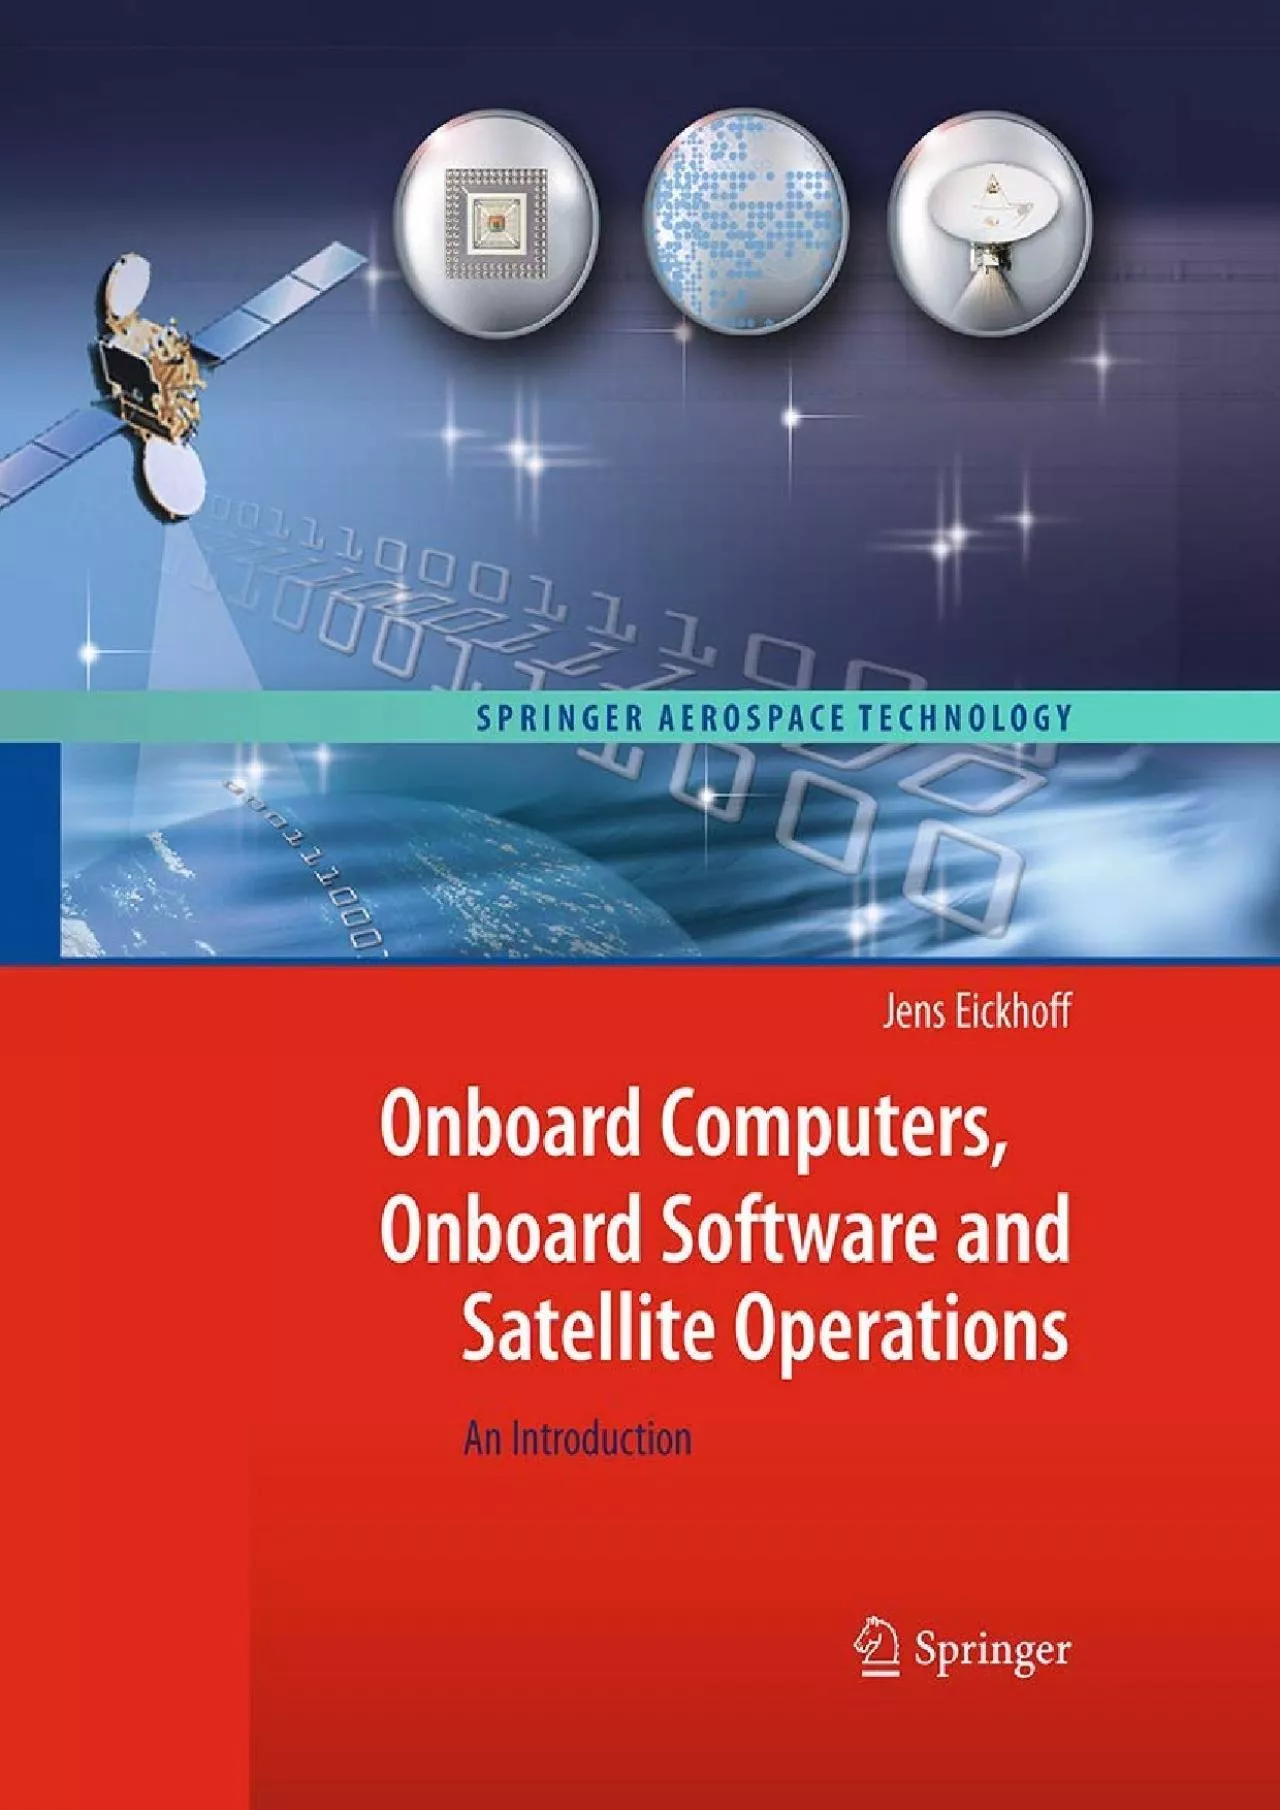 (BOOS)-Onboard Computers, Onboard Software and Satellite Operations: An Introduction (Springer